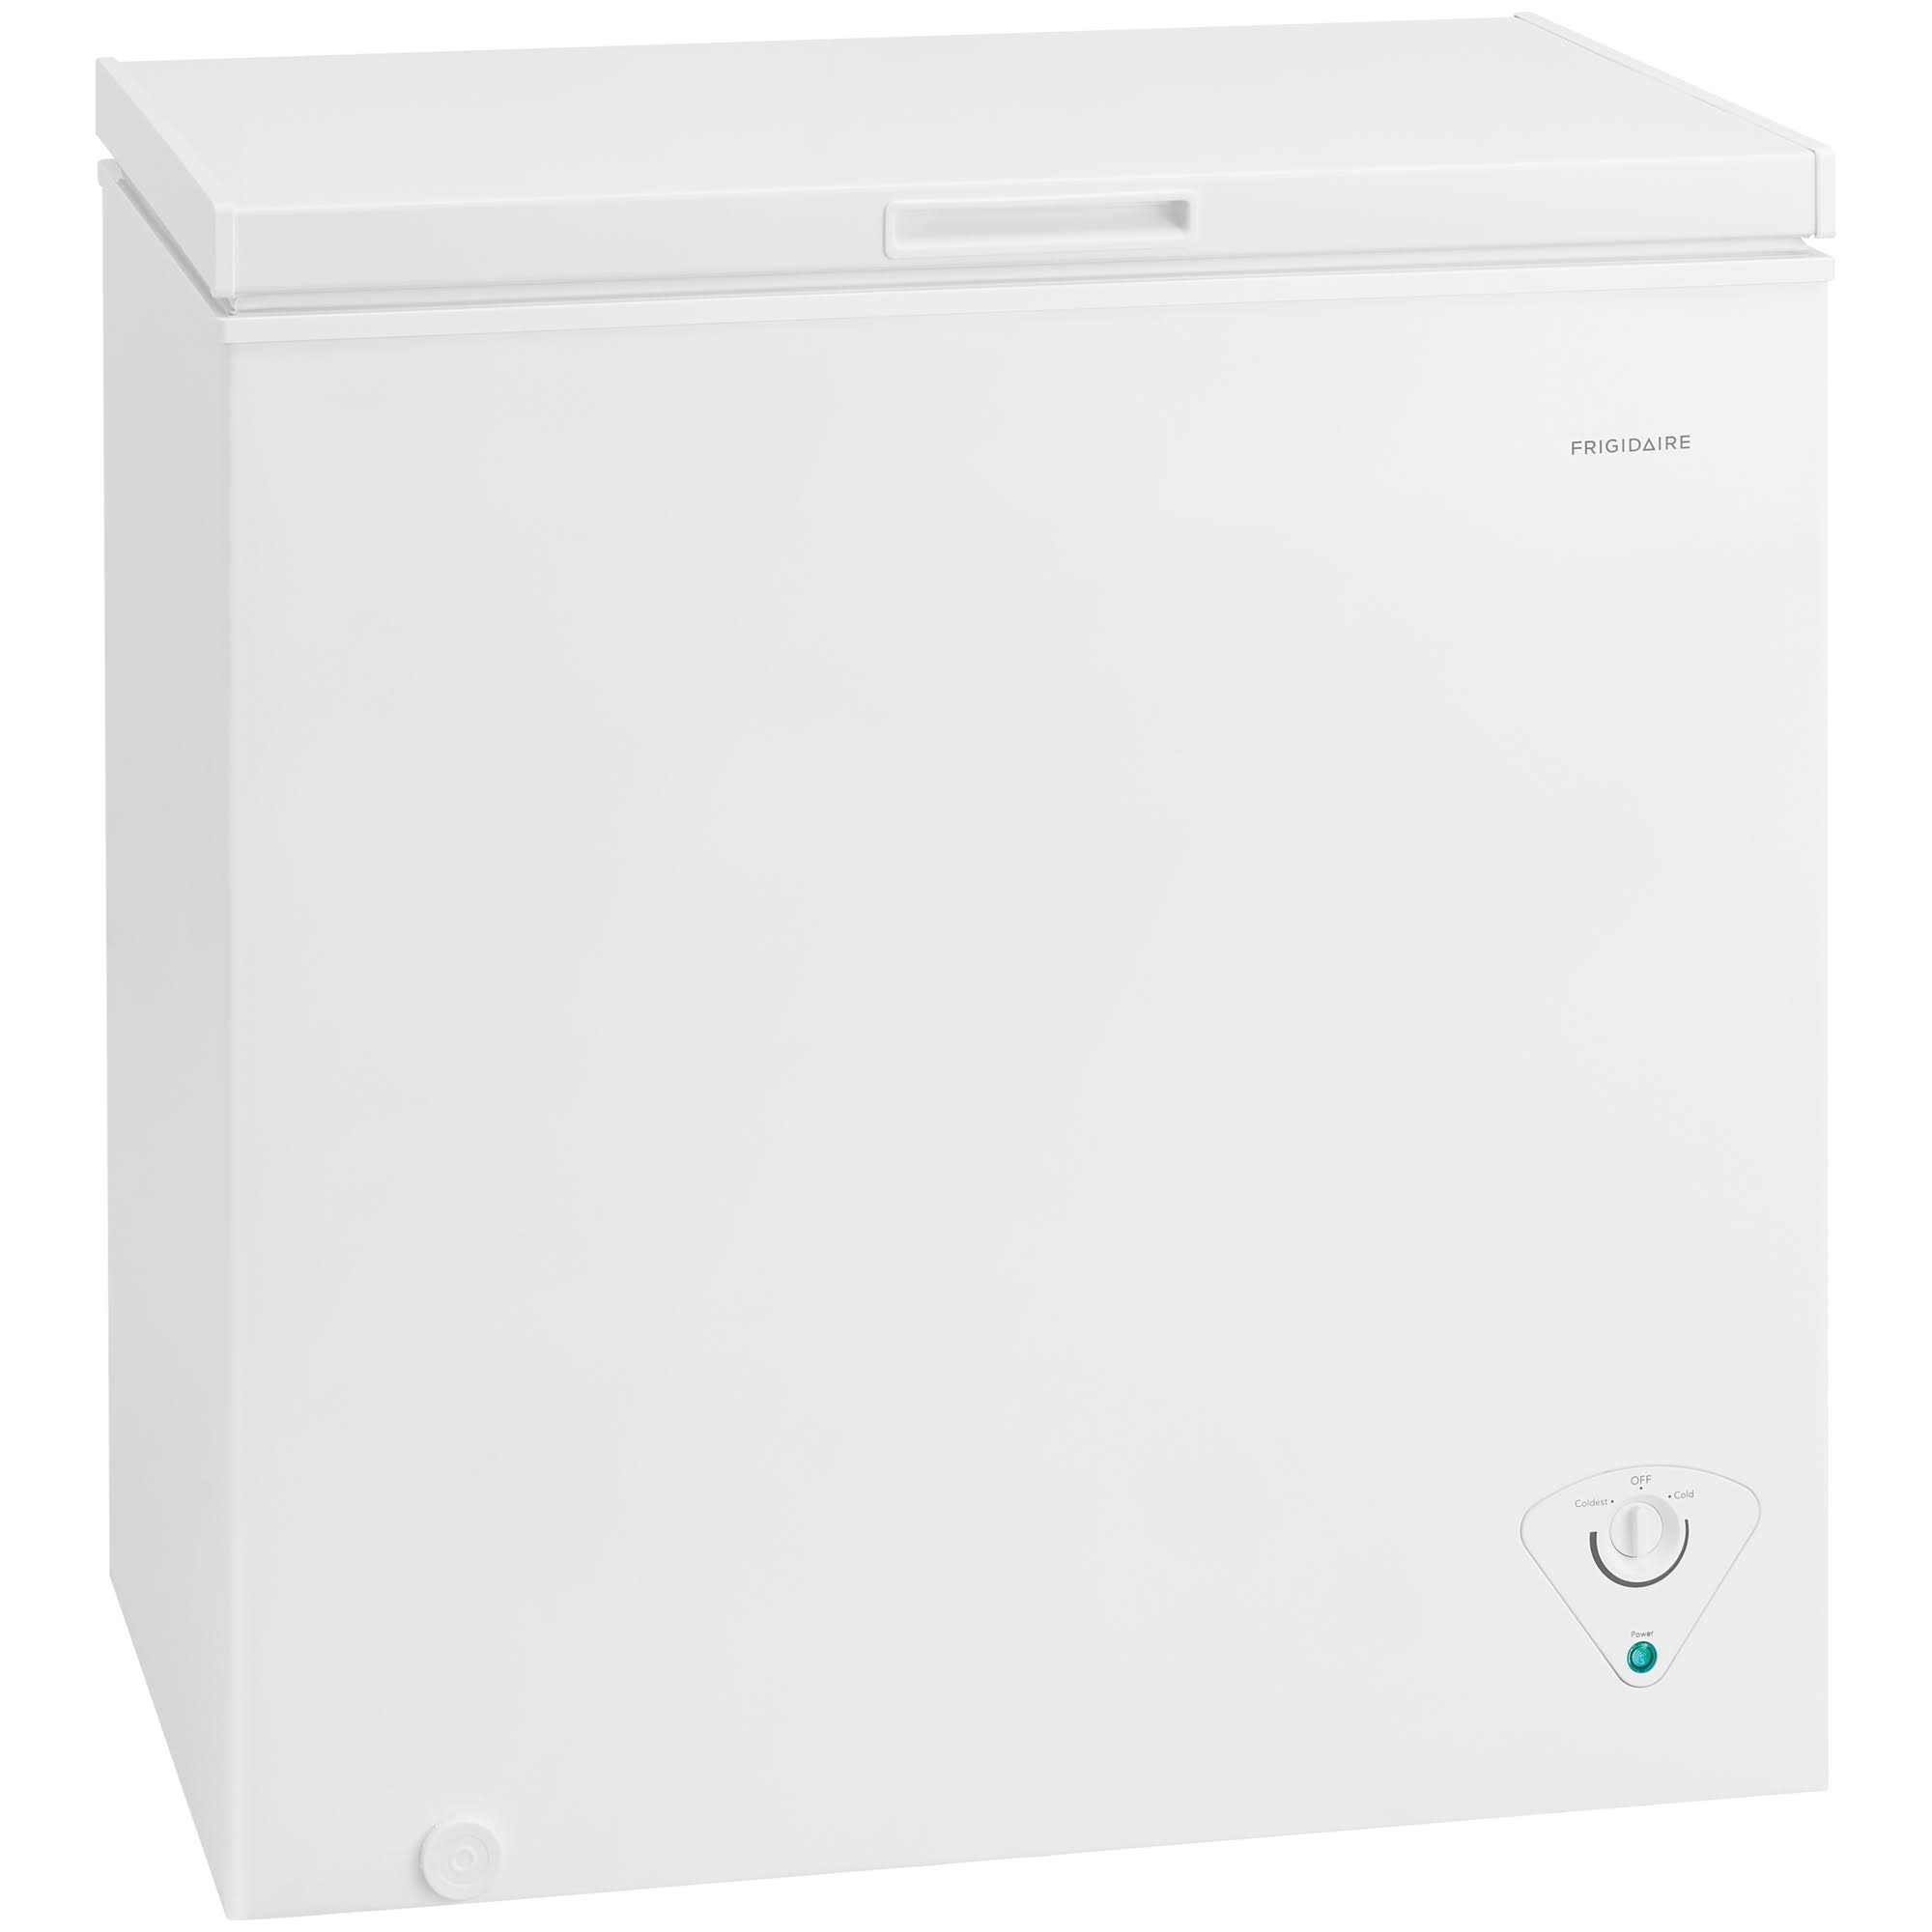 Frigidaire Ffcs0722aw 7 2 Cu Ft Chest Freezer White Itusts